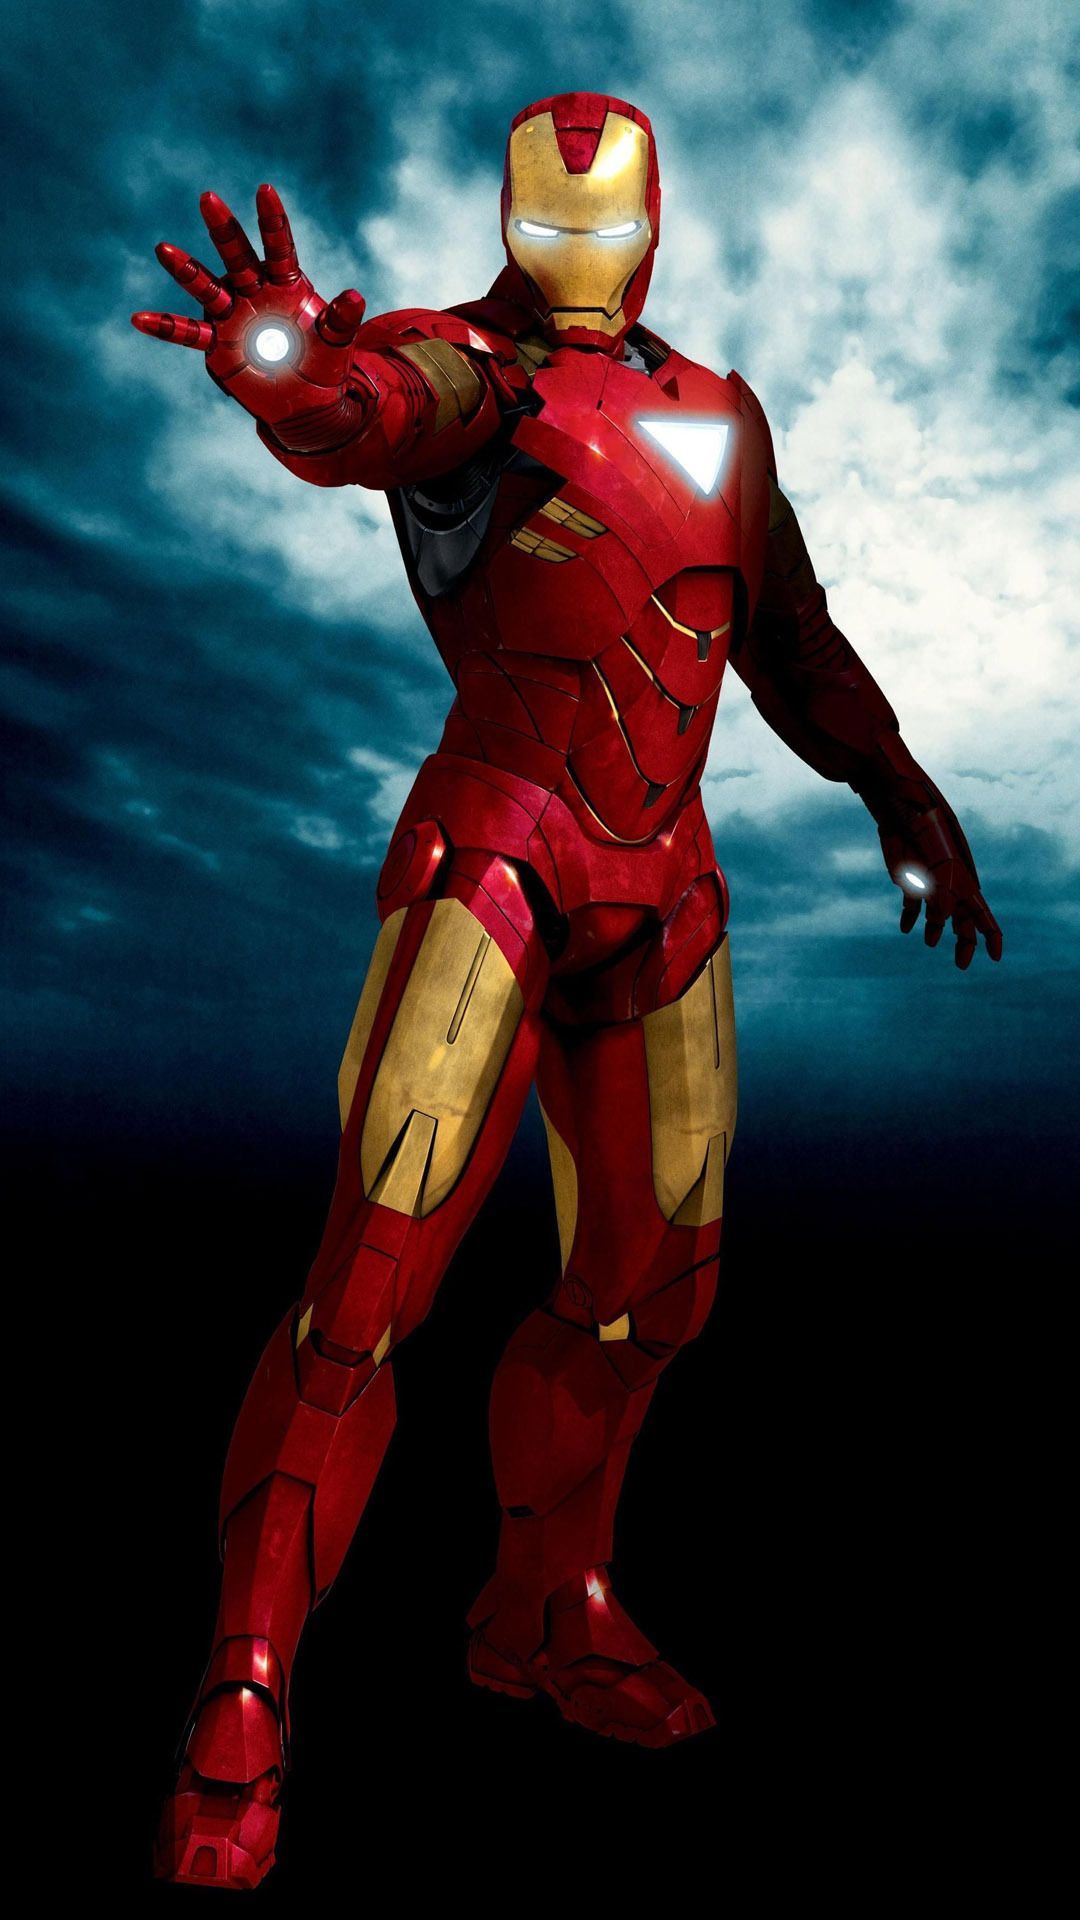 Awesome Iron Man Fond D Écran iPhone Mobile Android HD Iron Man HD Wallpaper For Mobile